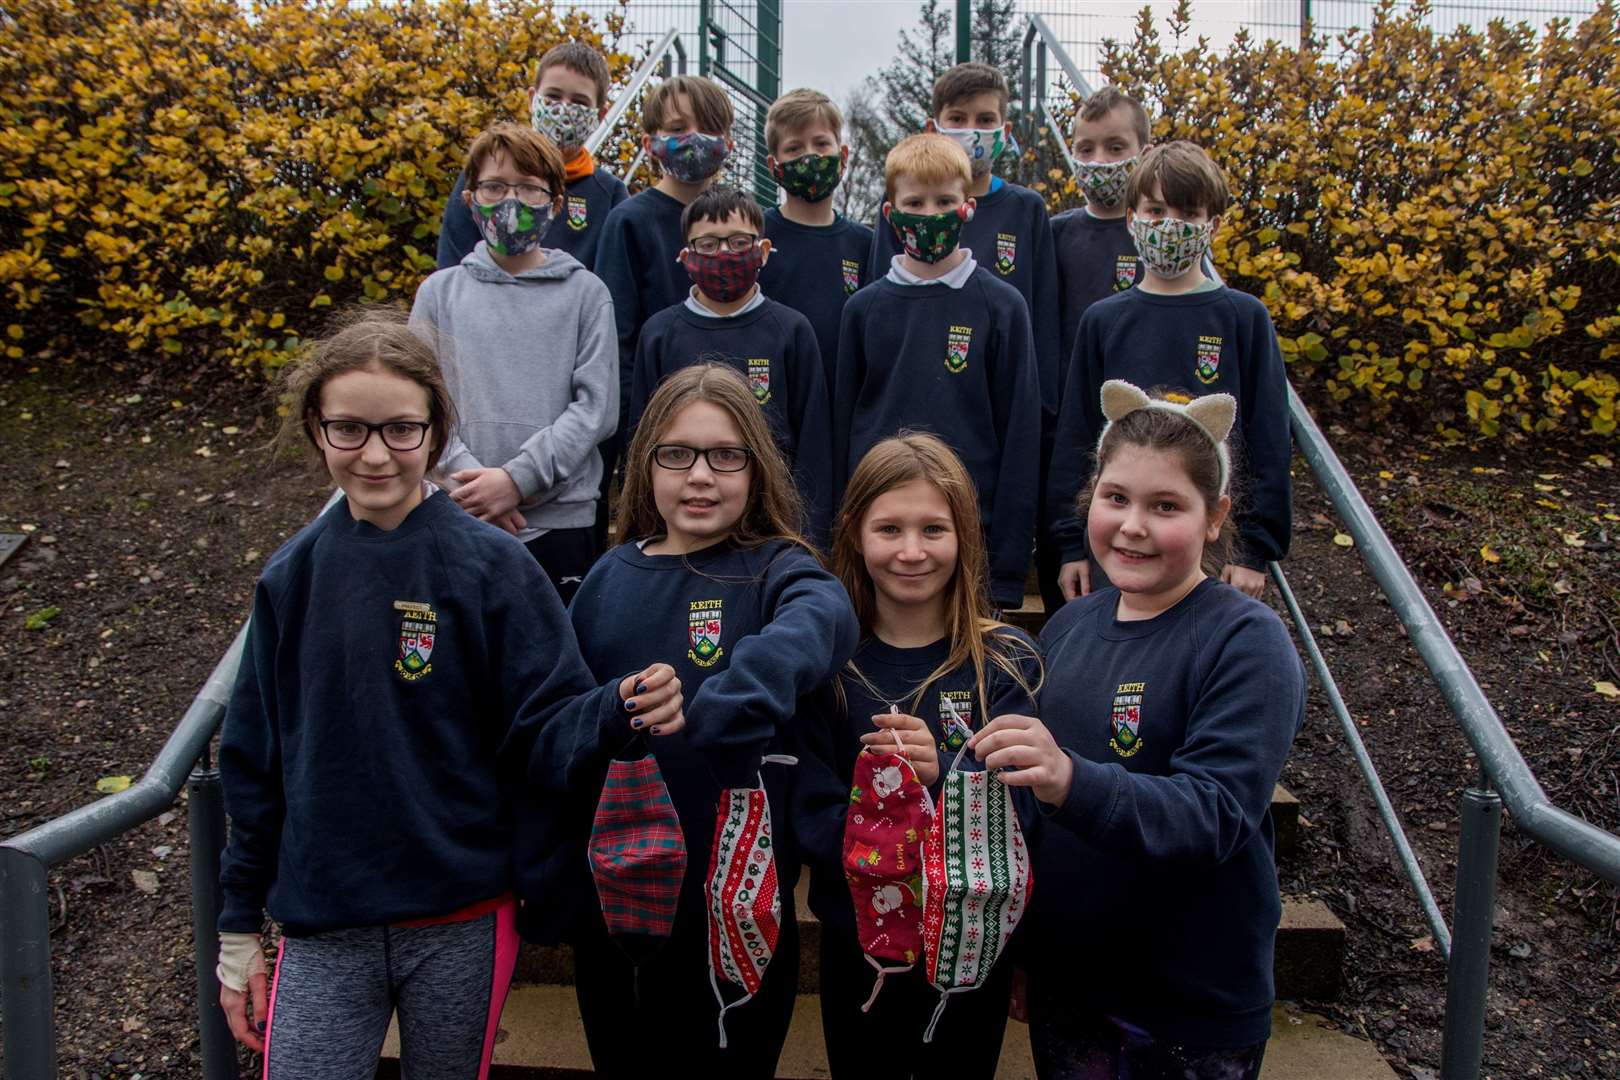 Keith's Primary School P7 pupils have made 200 masks - selling 190 and donating 10 - to raise funds for the school...Picture: Becky Saunderson..